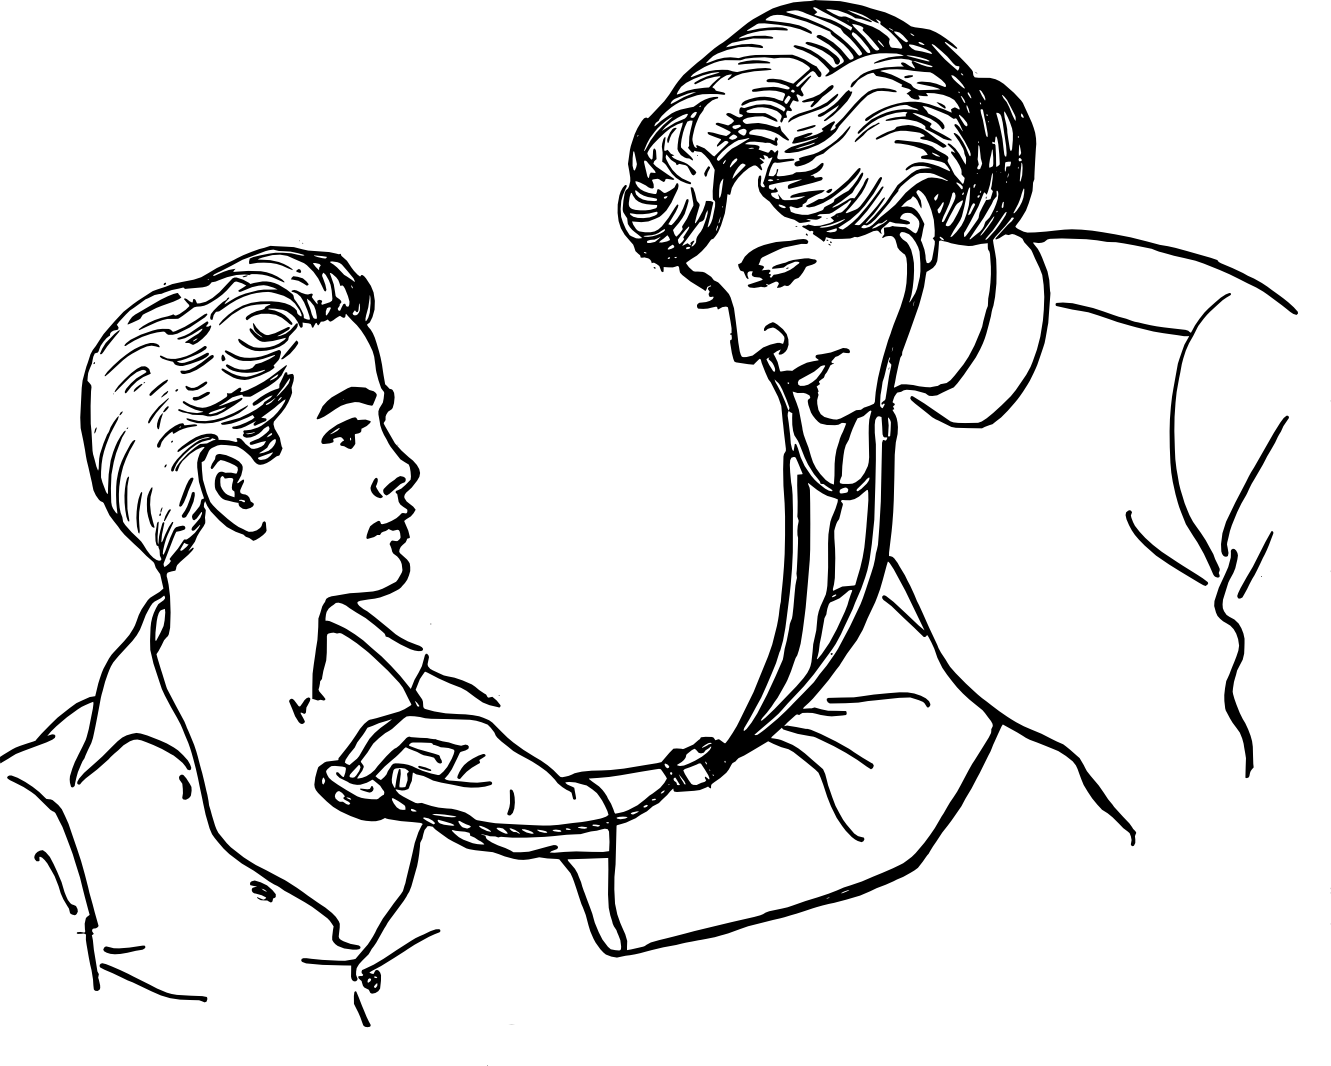 Free Medical People Cliparts, Download Free Clip Art, Free.